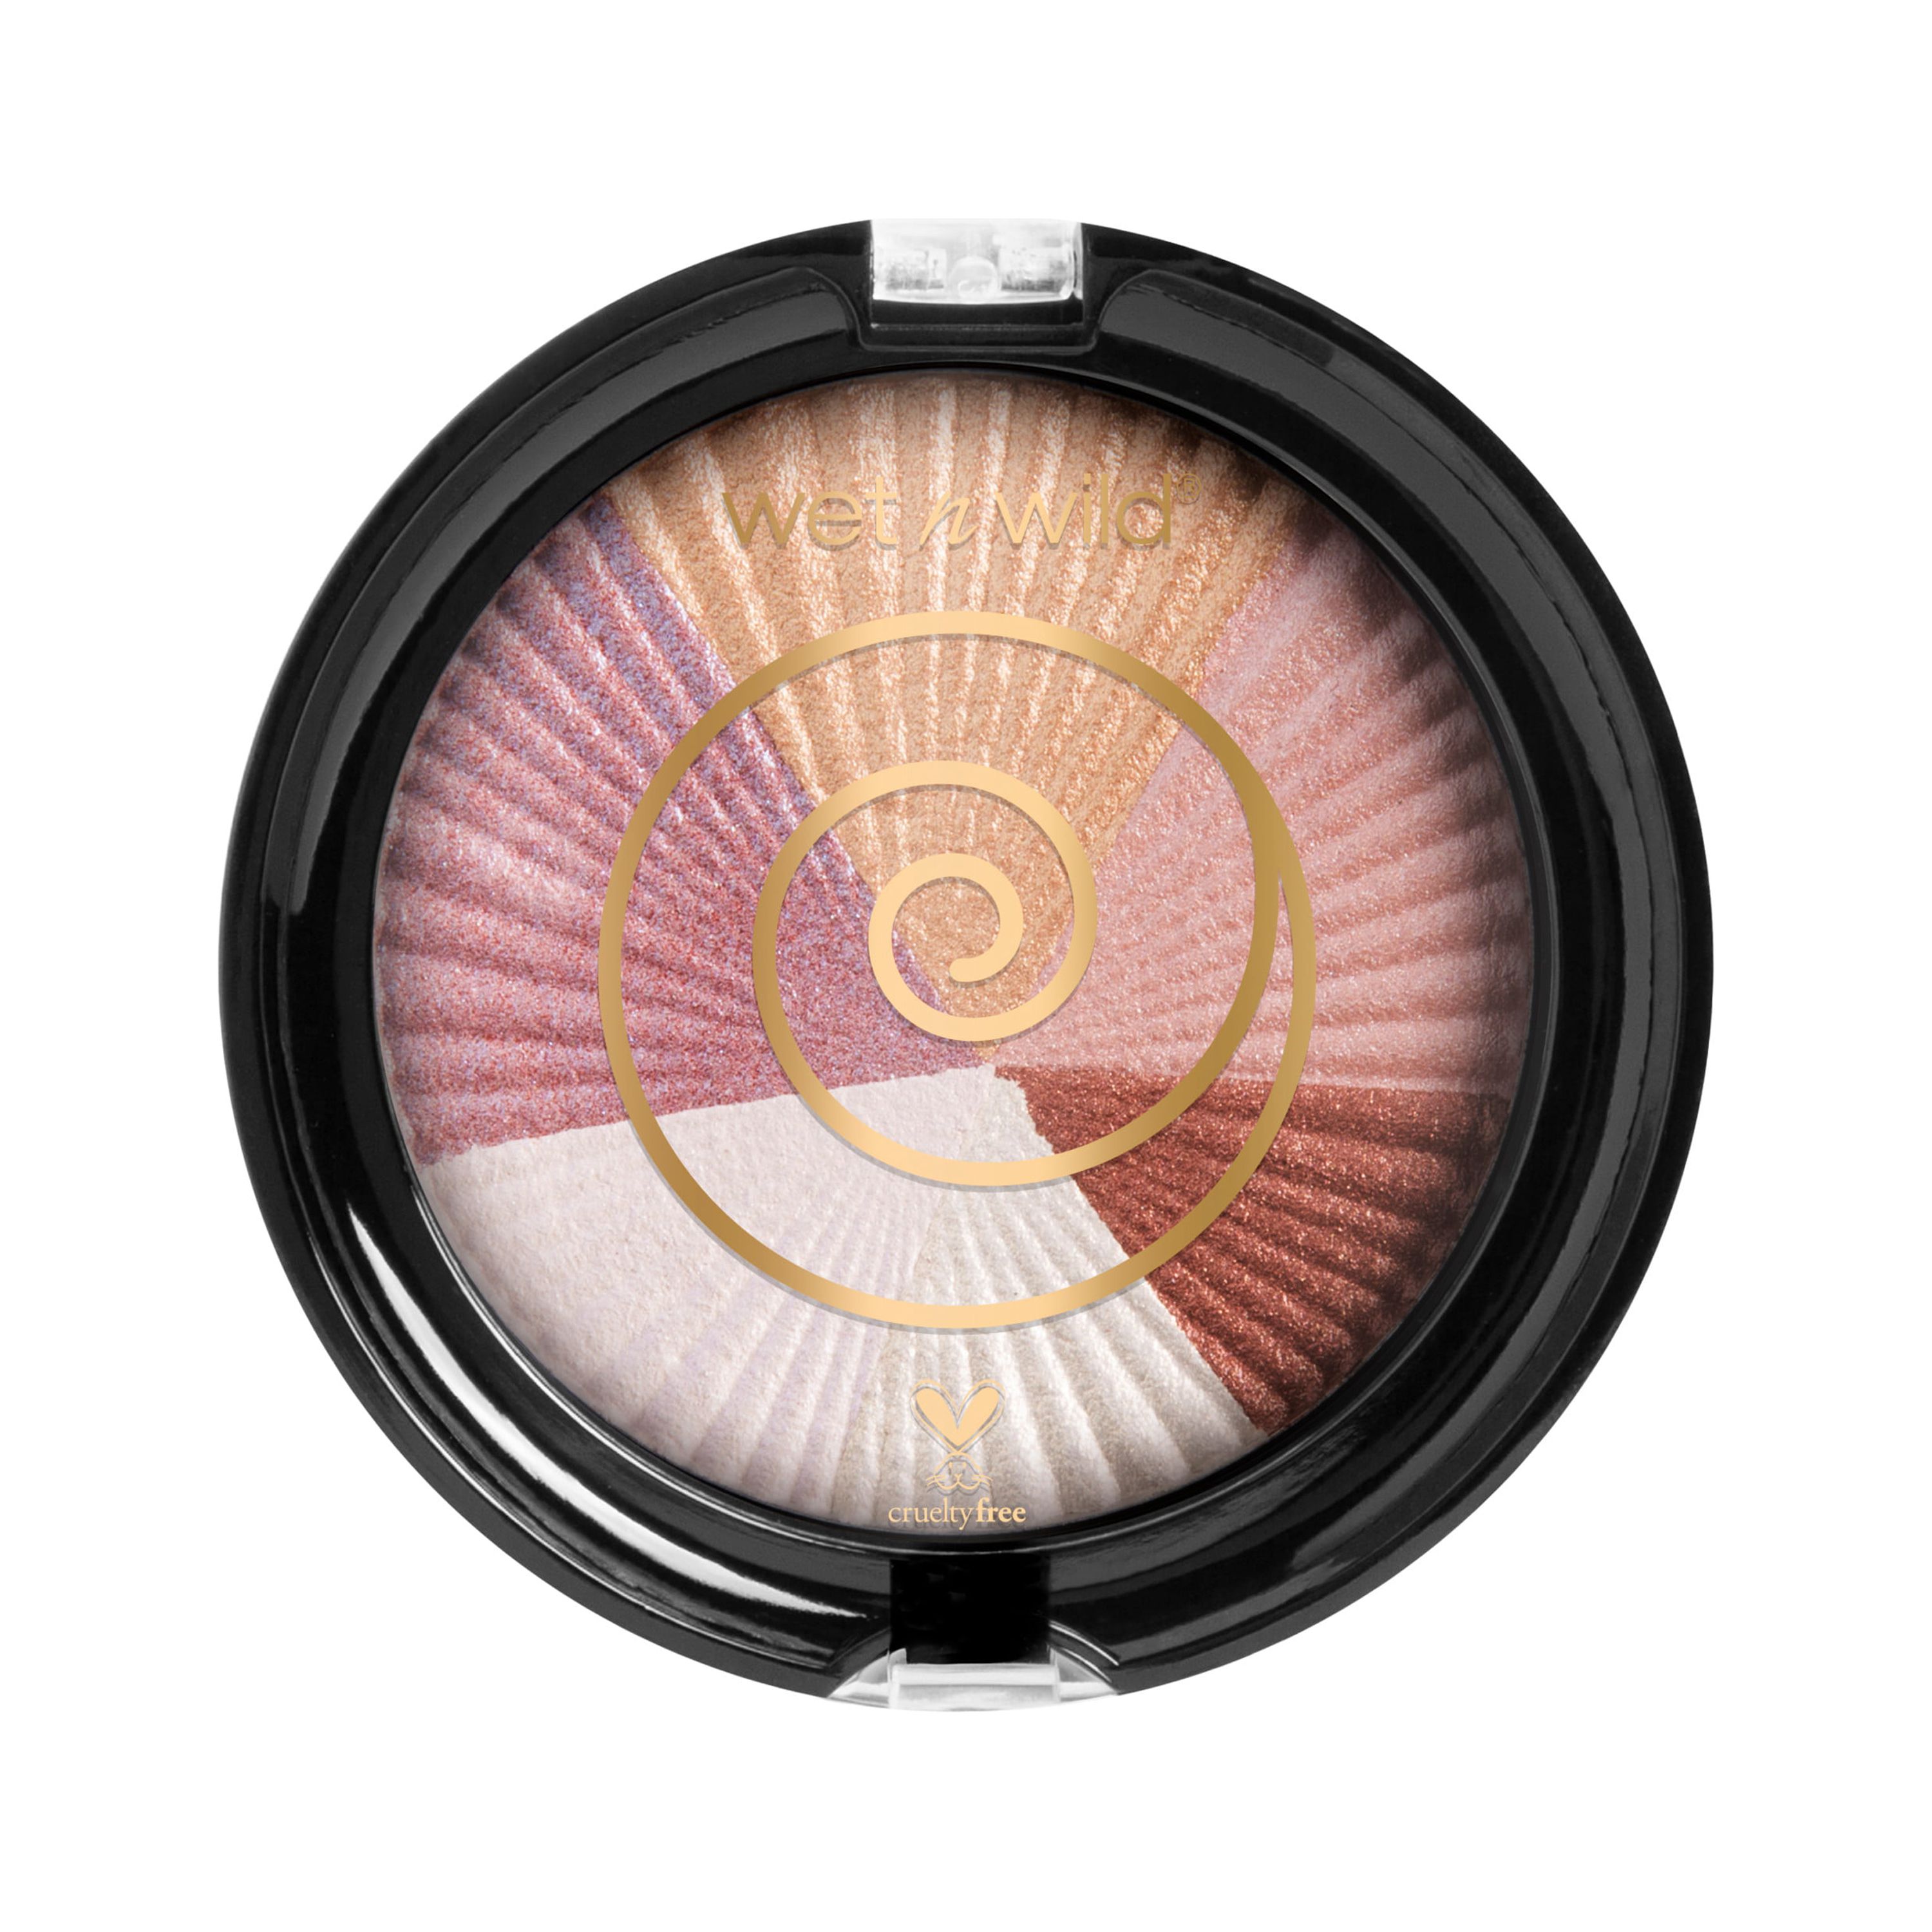 wet n wild Color Icon Eyeshadow, Air - image 1 of 3